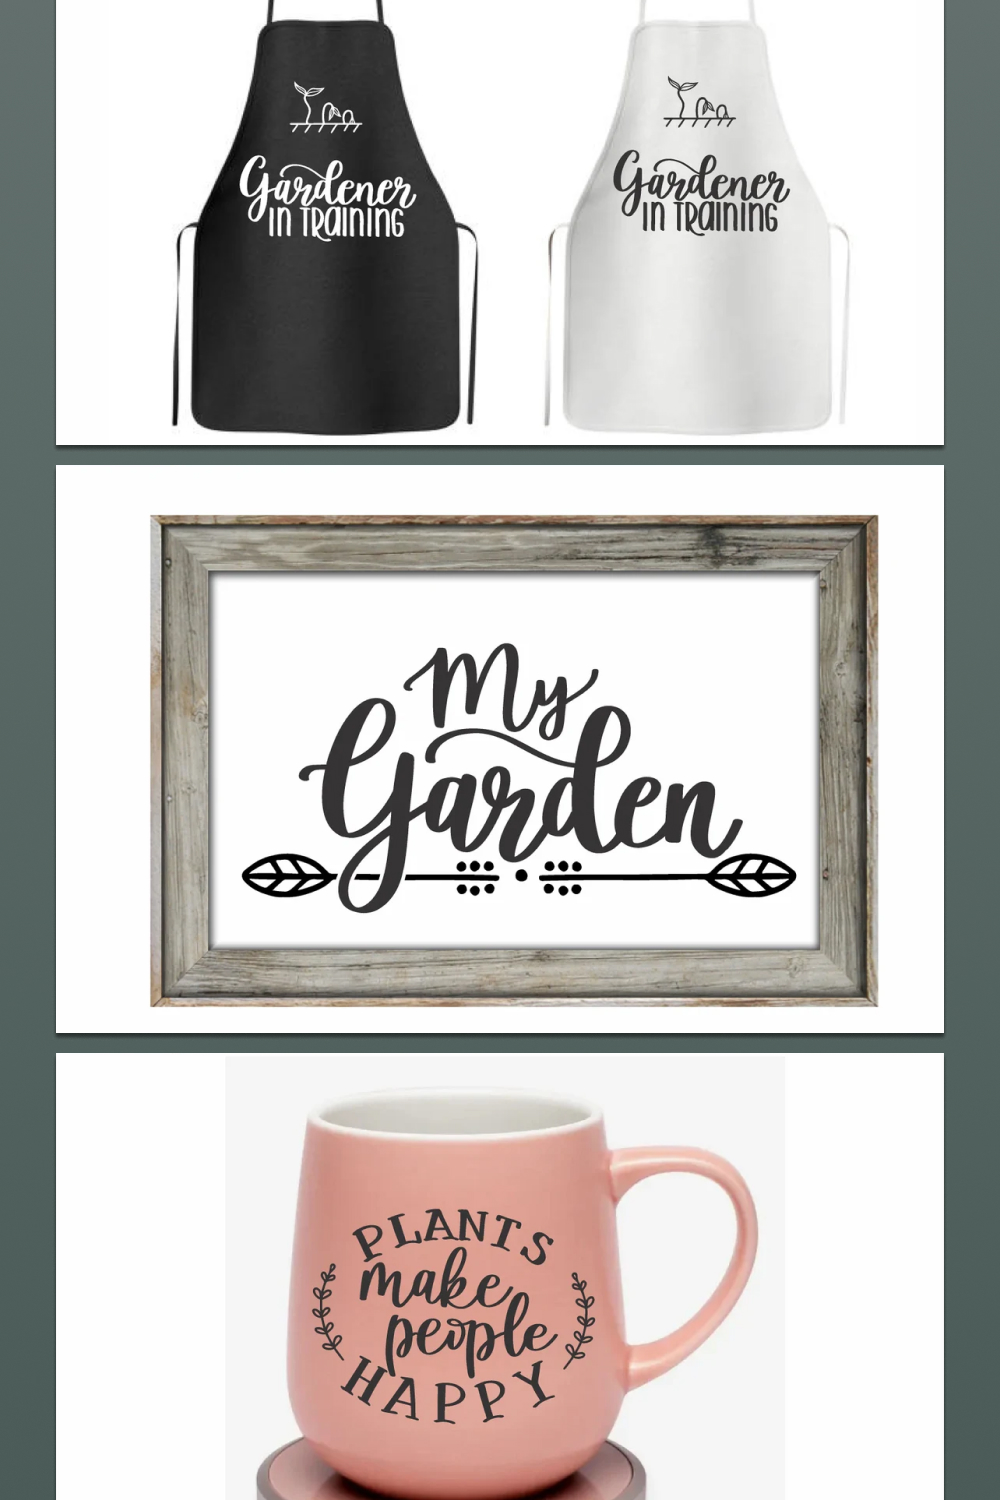 Prints for your personalization for aprons, mugs and paintings.